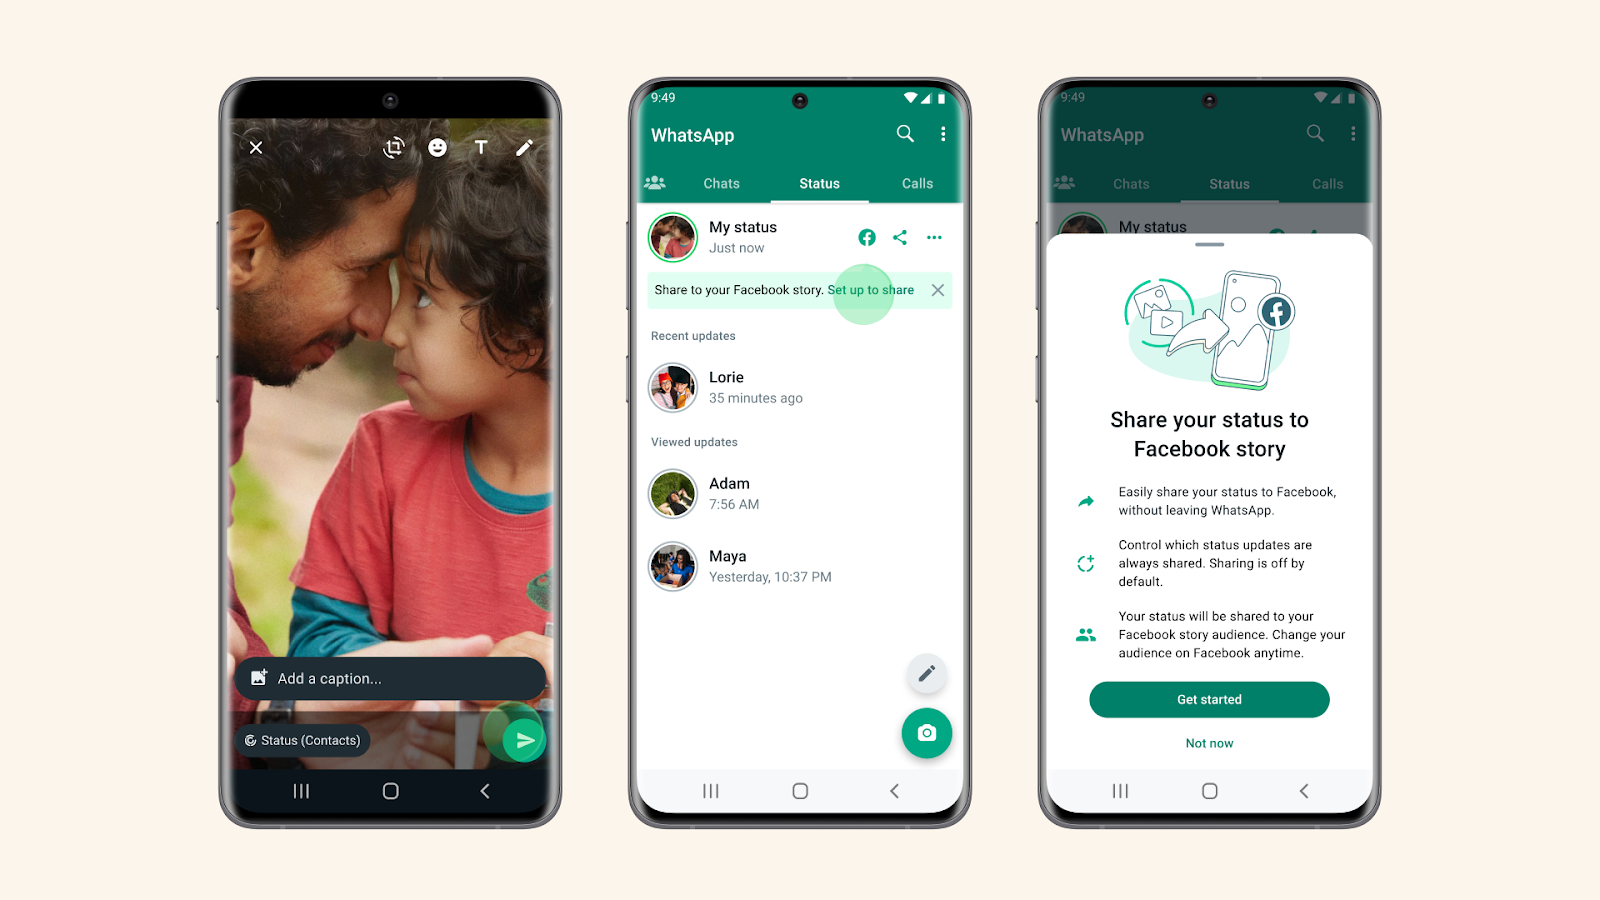 WhatsApp Introduces New Status-Sharing Feature Linked to Facebook